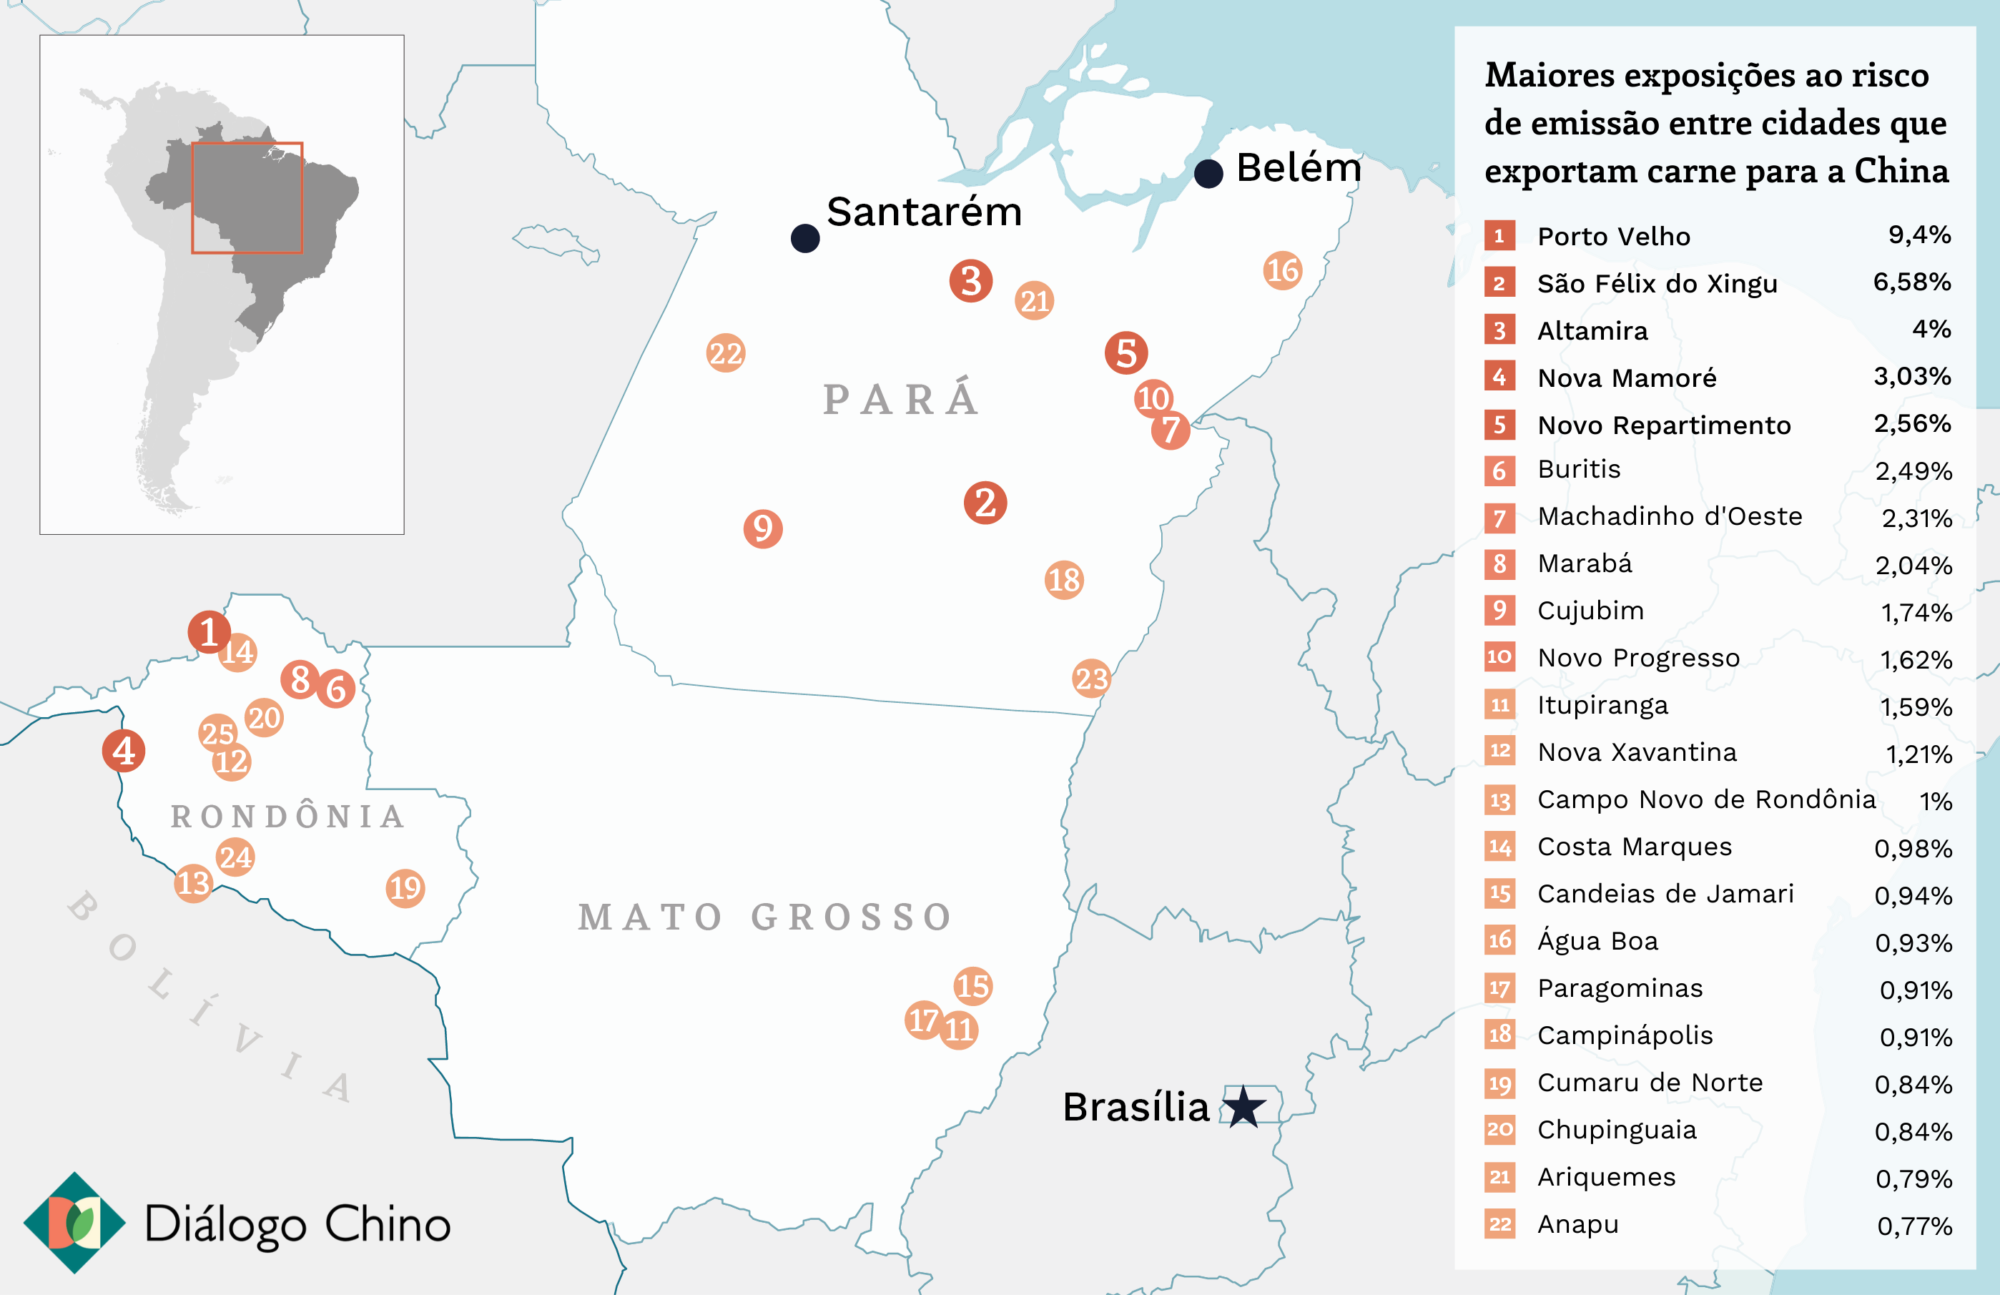 map that shows beef exporting cities in brazil with highest emissions risk